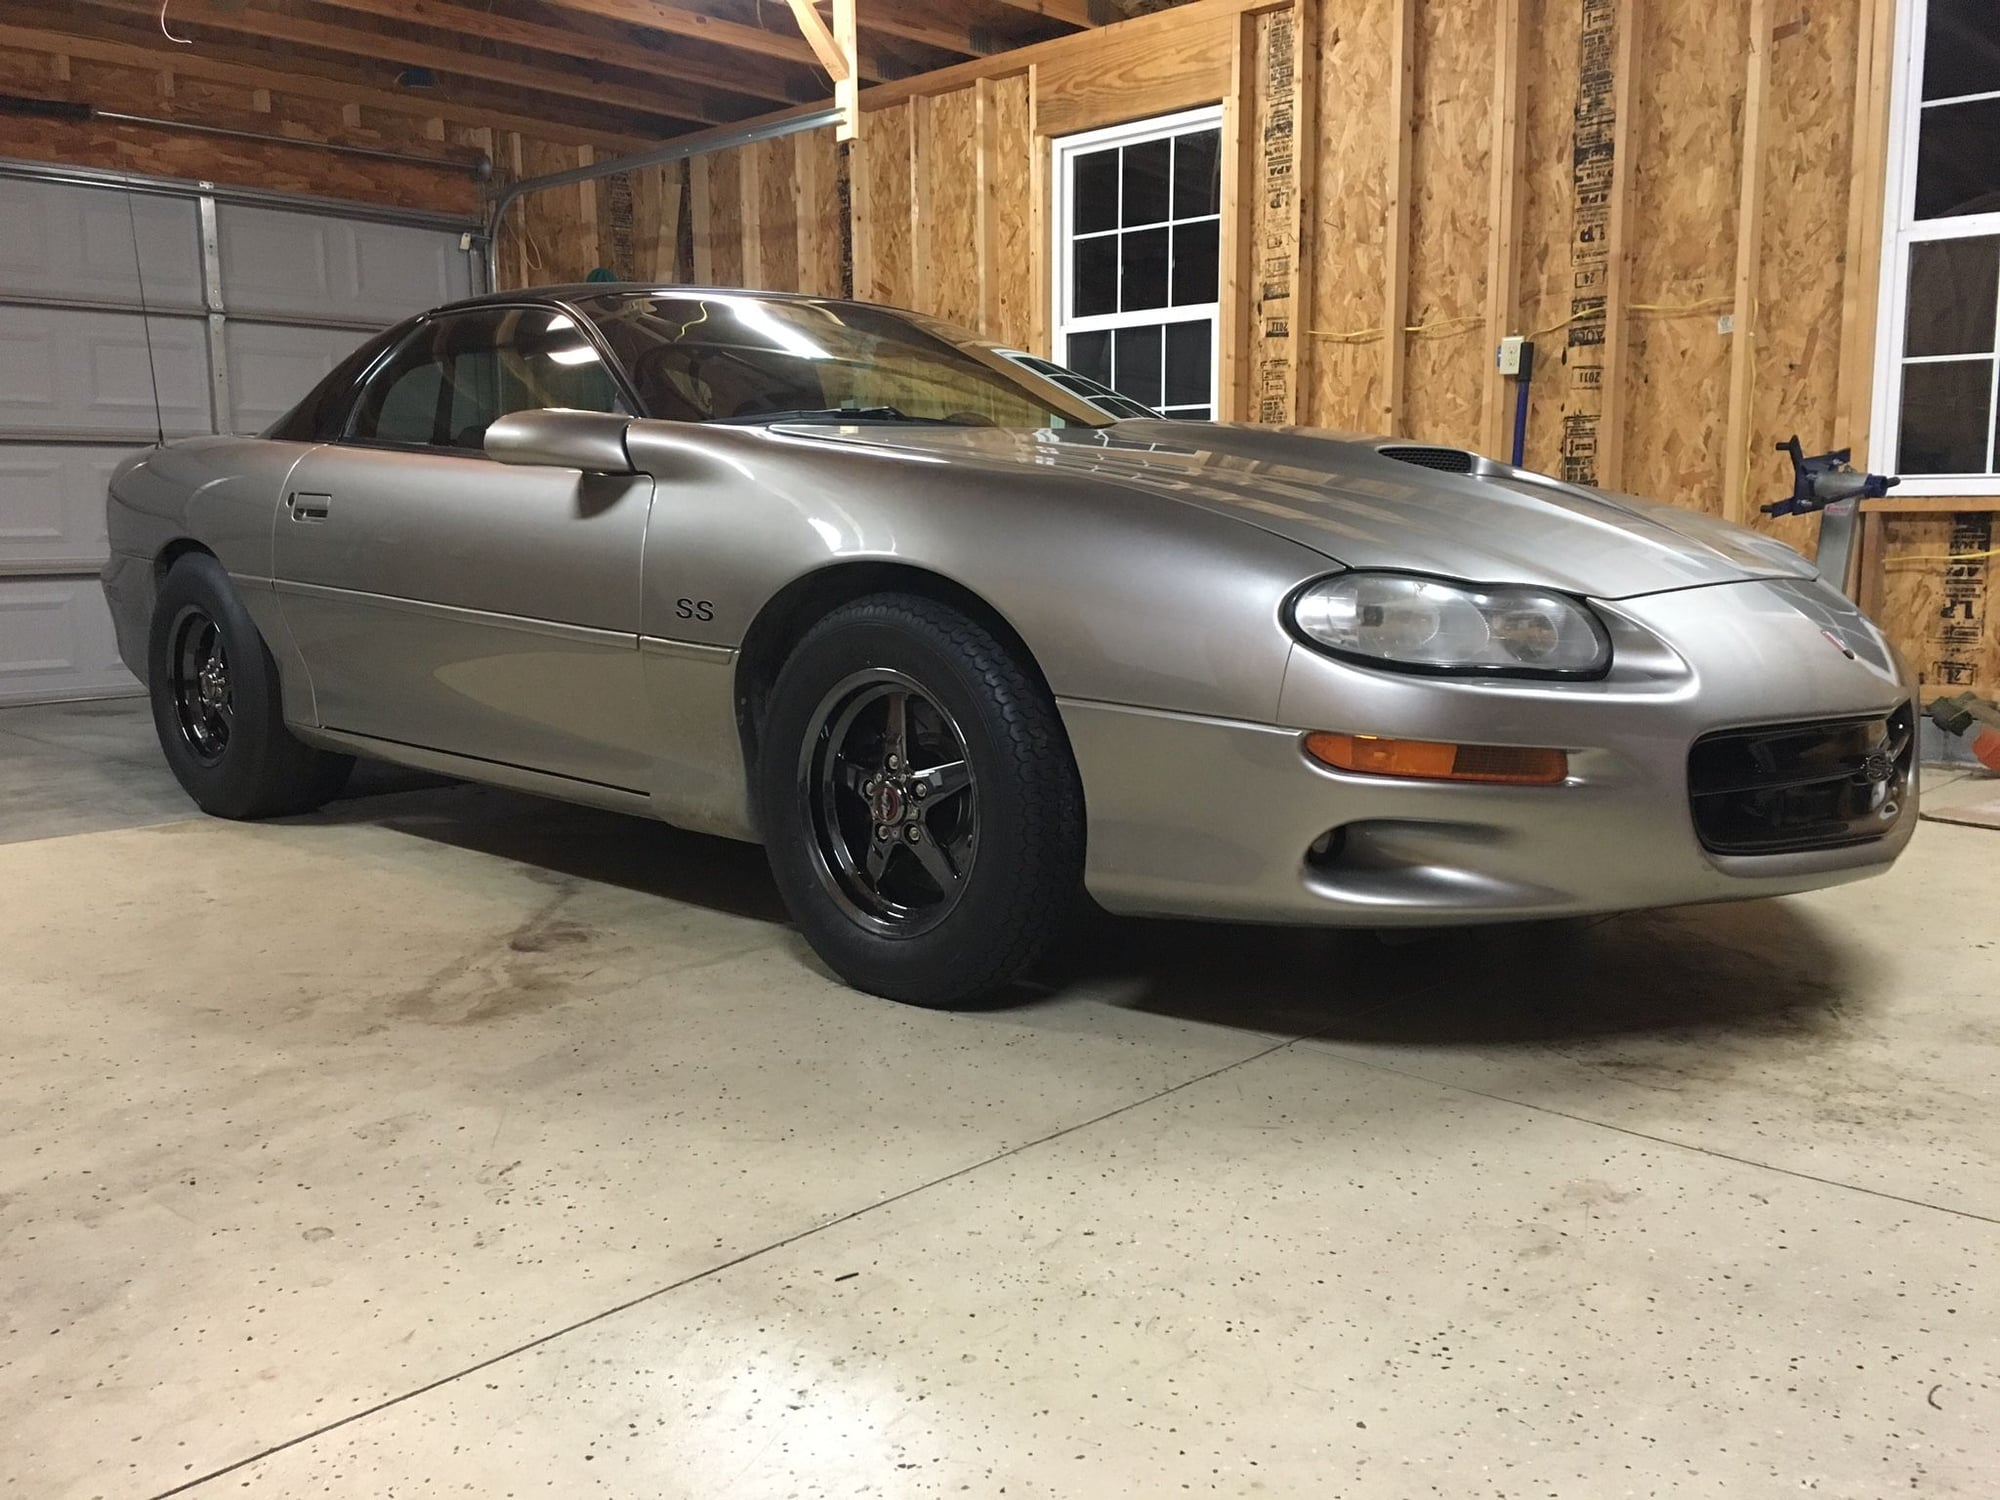 2001 Chevrolet Camaro - 2001 Camaro SS Stroker/T56 - Used - VIN 1G8475165751 - 8 cyl - 2WD - Manual - Other - Lewisport, KY 42351, United States